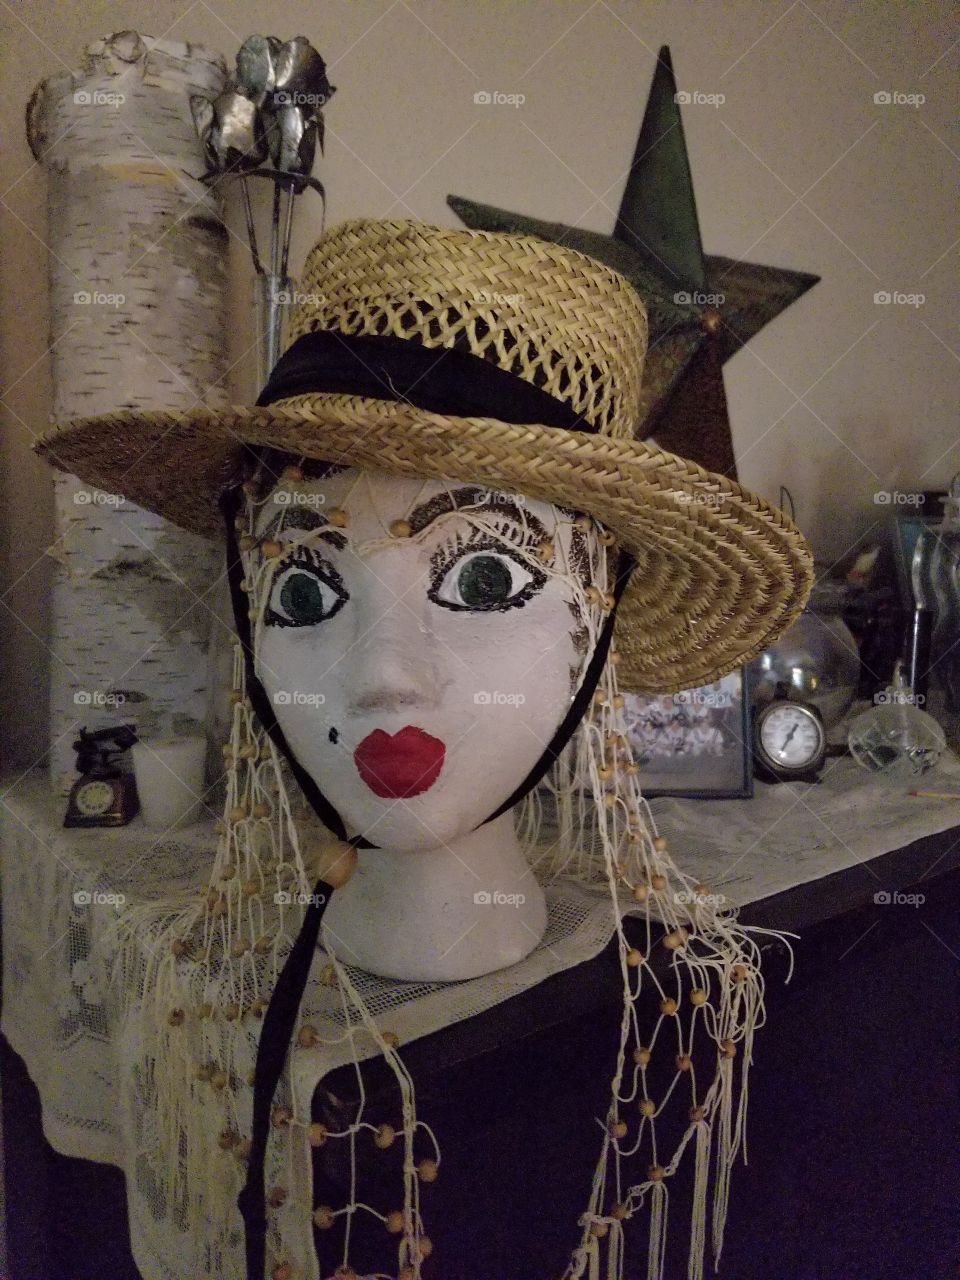 Female Mannequin head with hat and makeup creative funky art decor